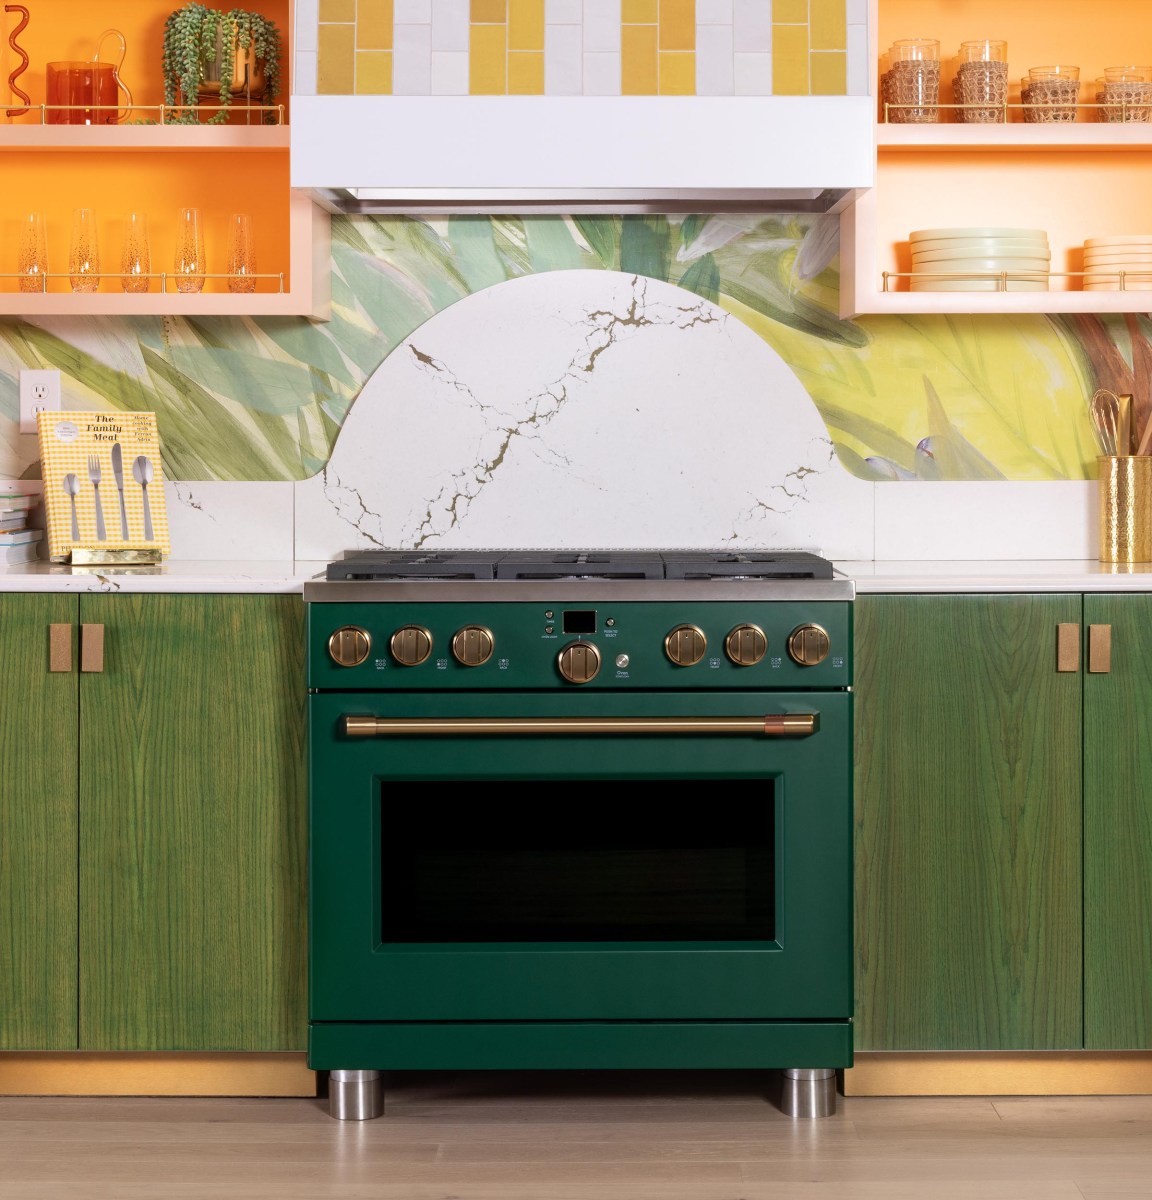 A green dual fuel range stands in a kitchen with green cabinets.